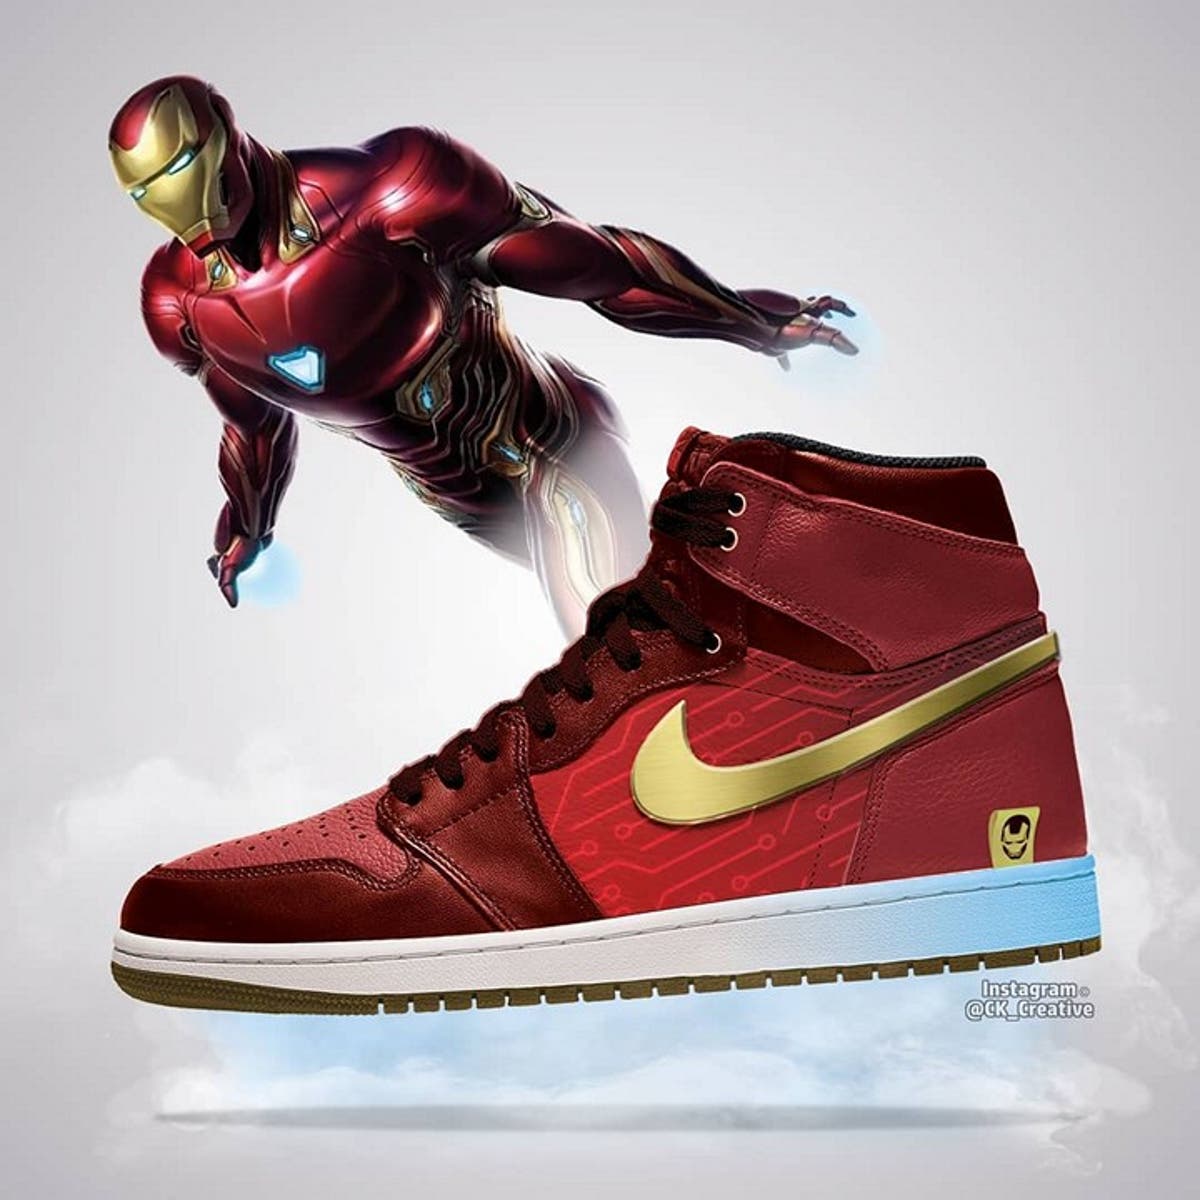 We Wish These Avengers-Inspired Jordans - When In Manila